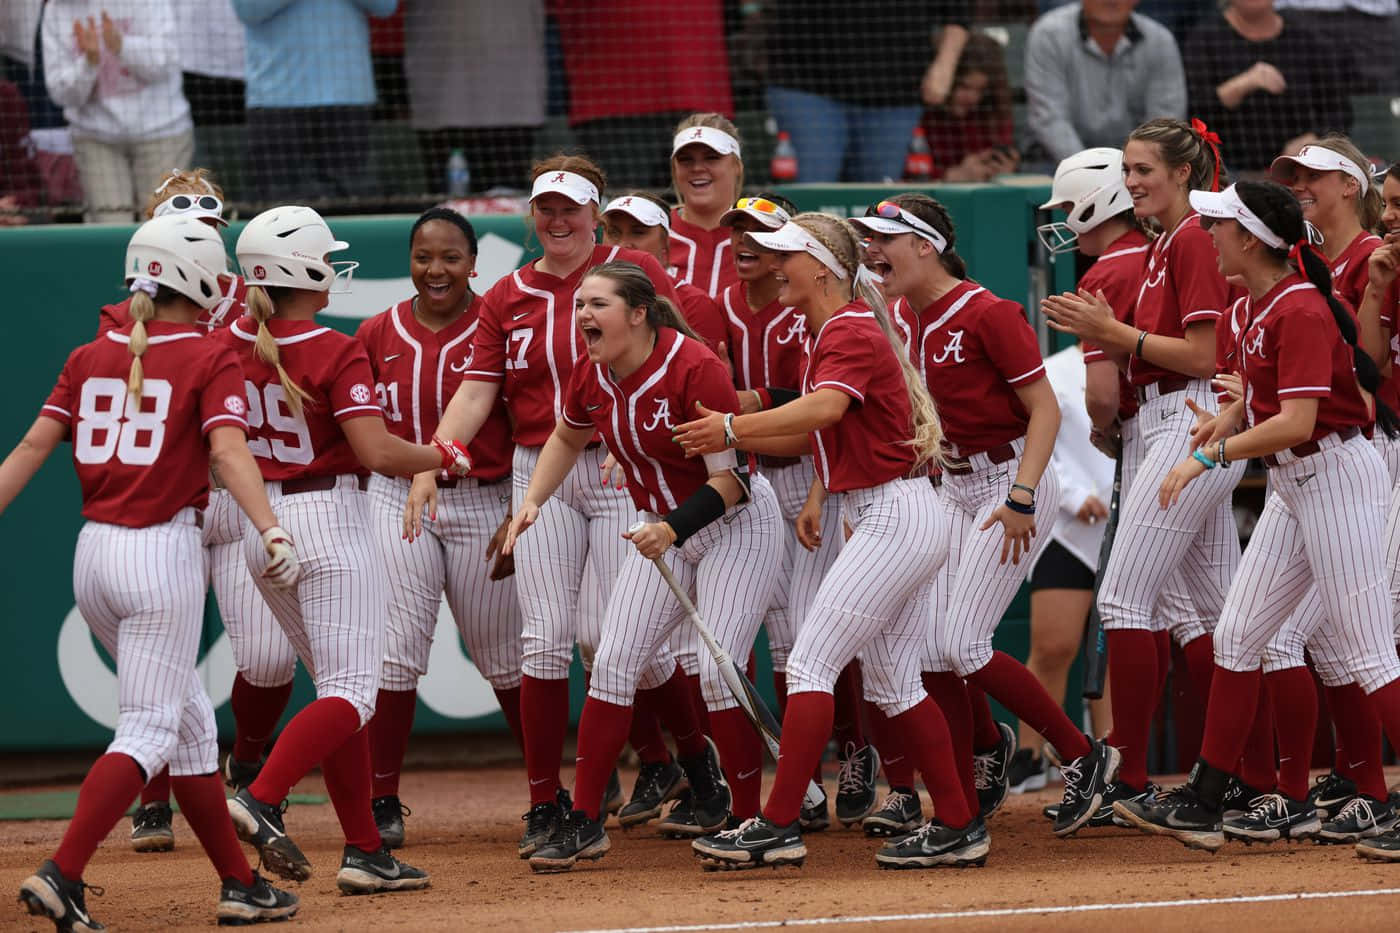 A Group Of Softball Players Celebrating On The Field